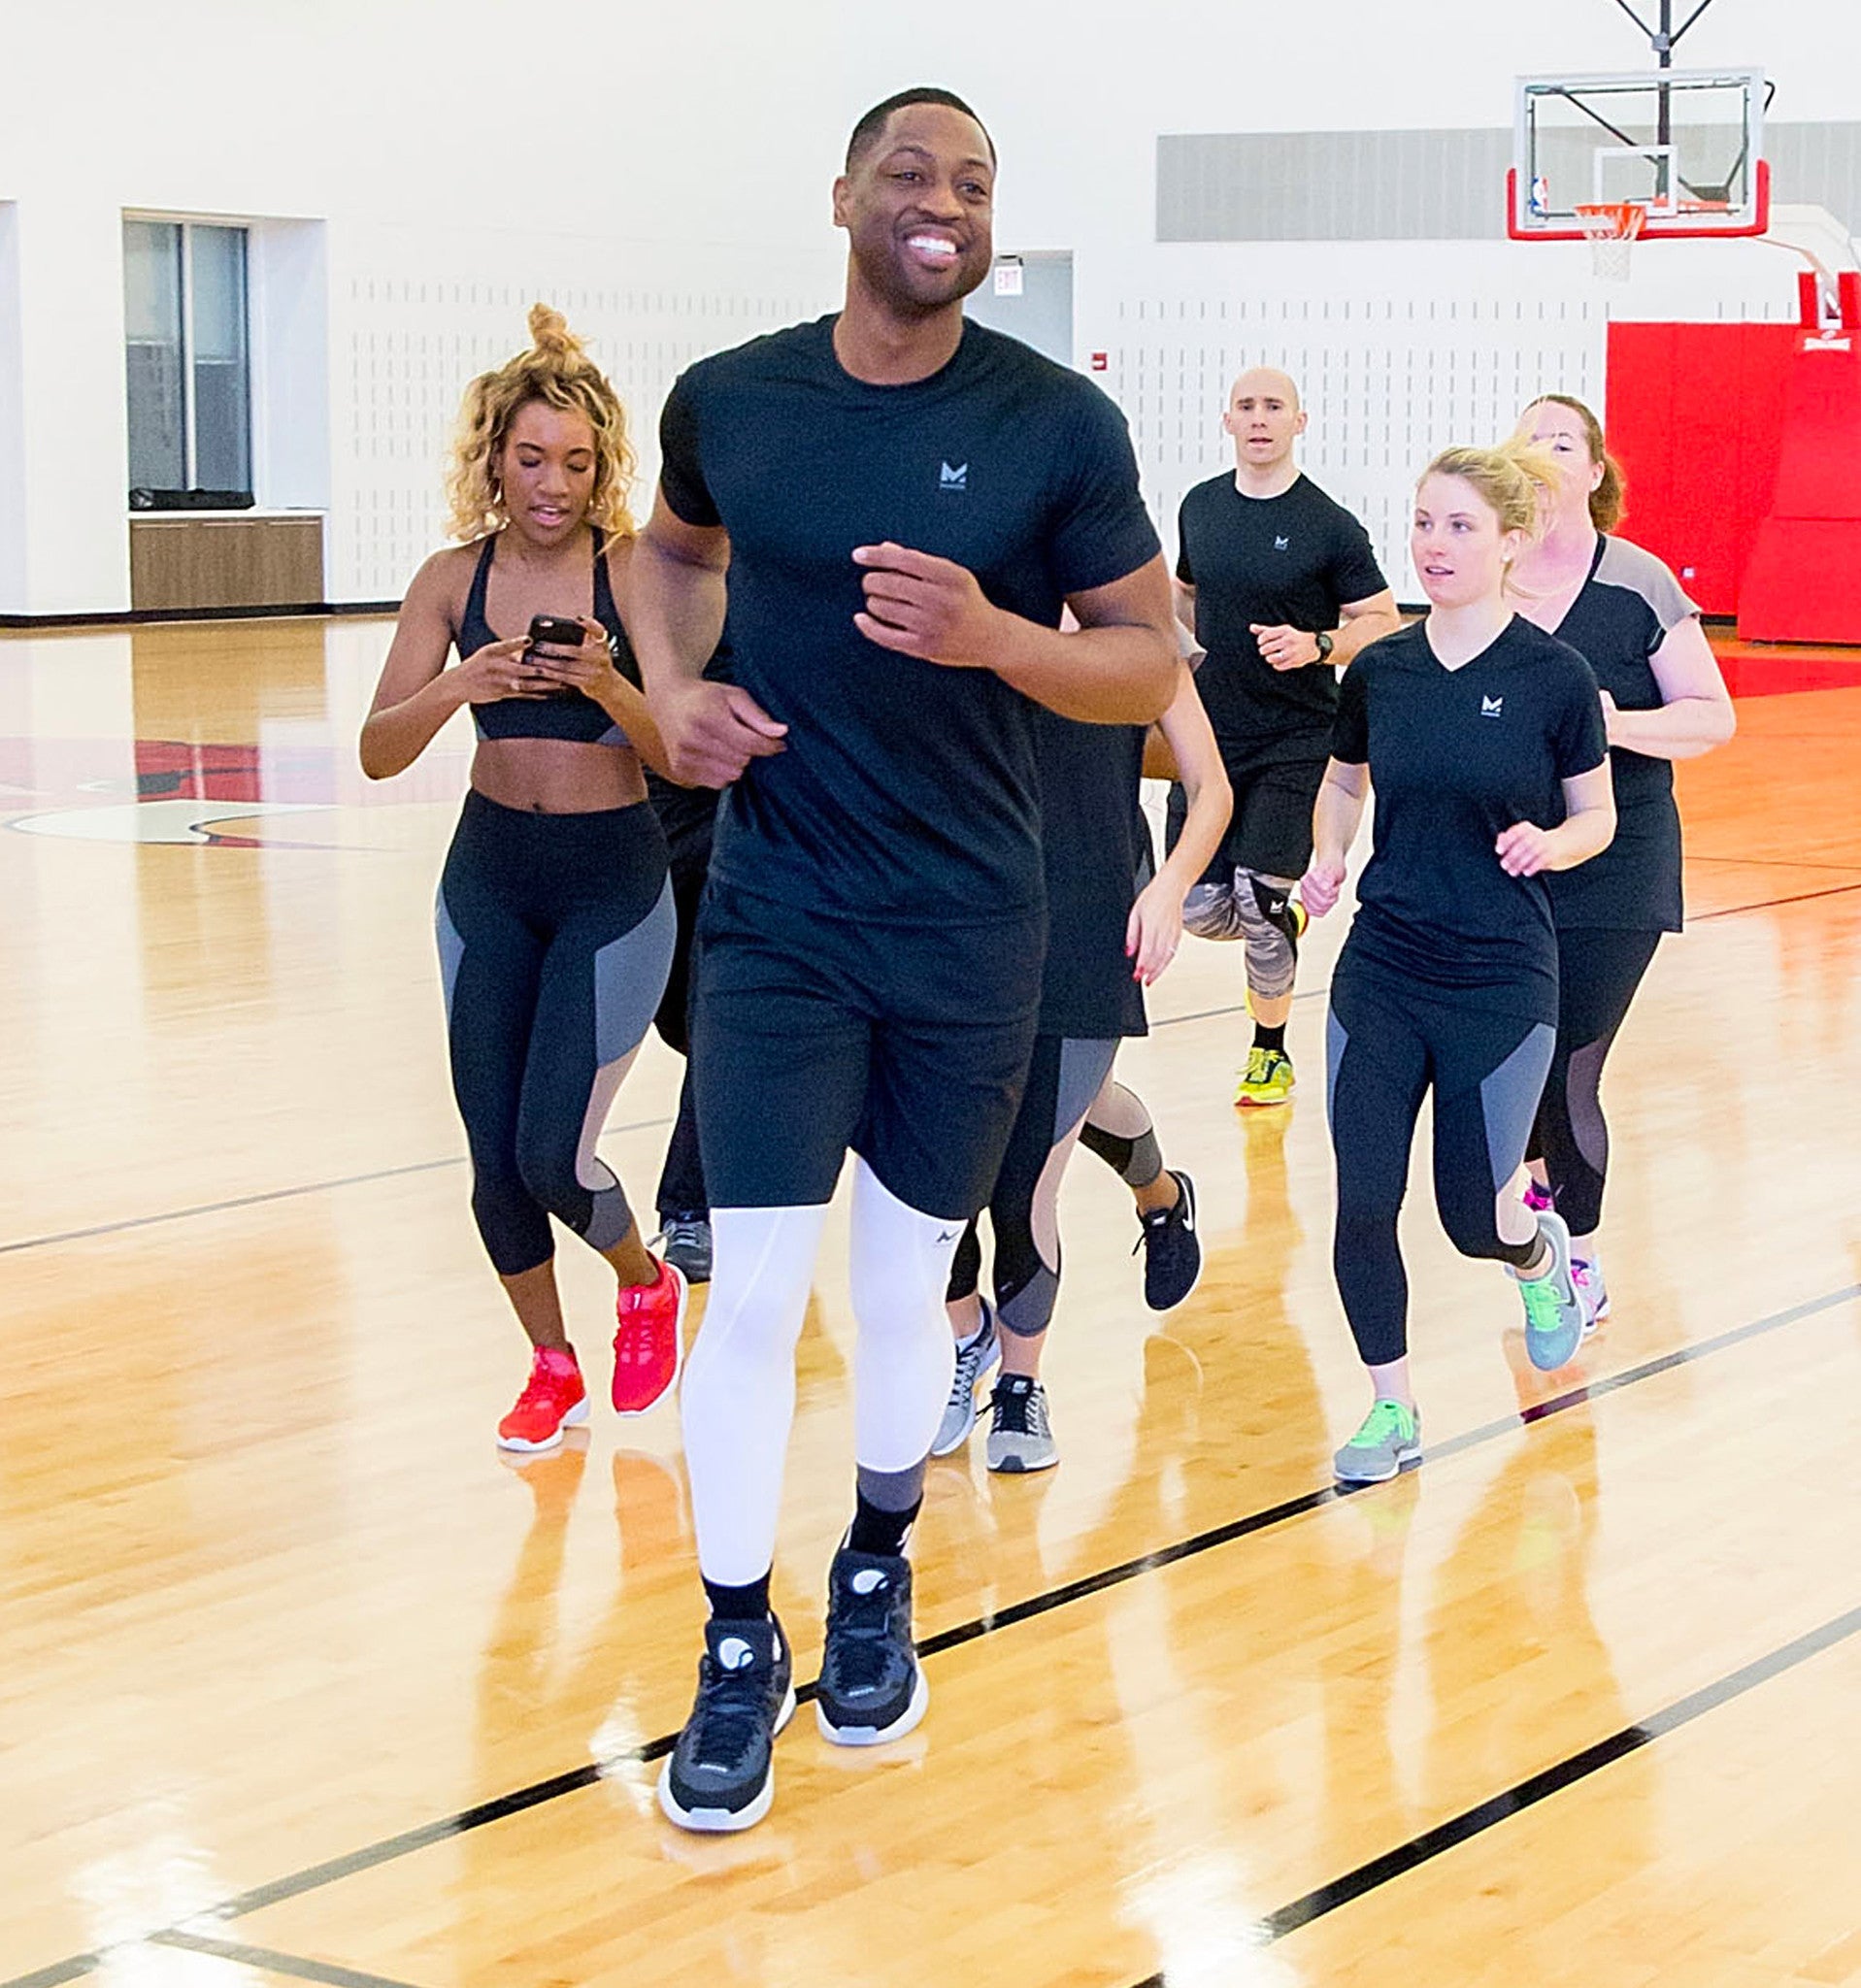 Men's Health - I worked out with Dwyane Wade and here's what happened